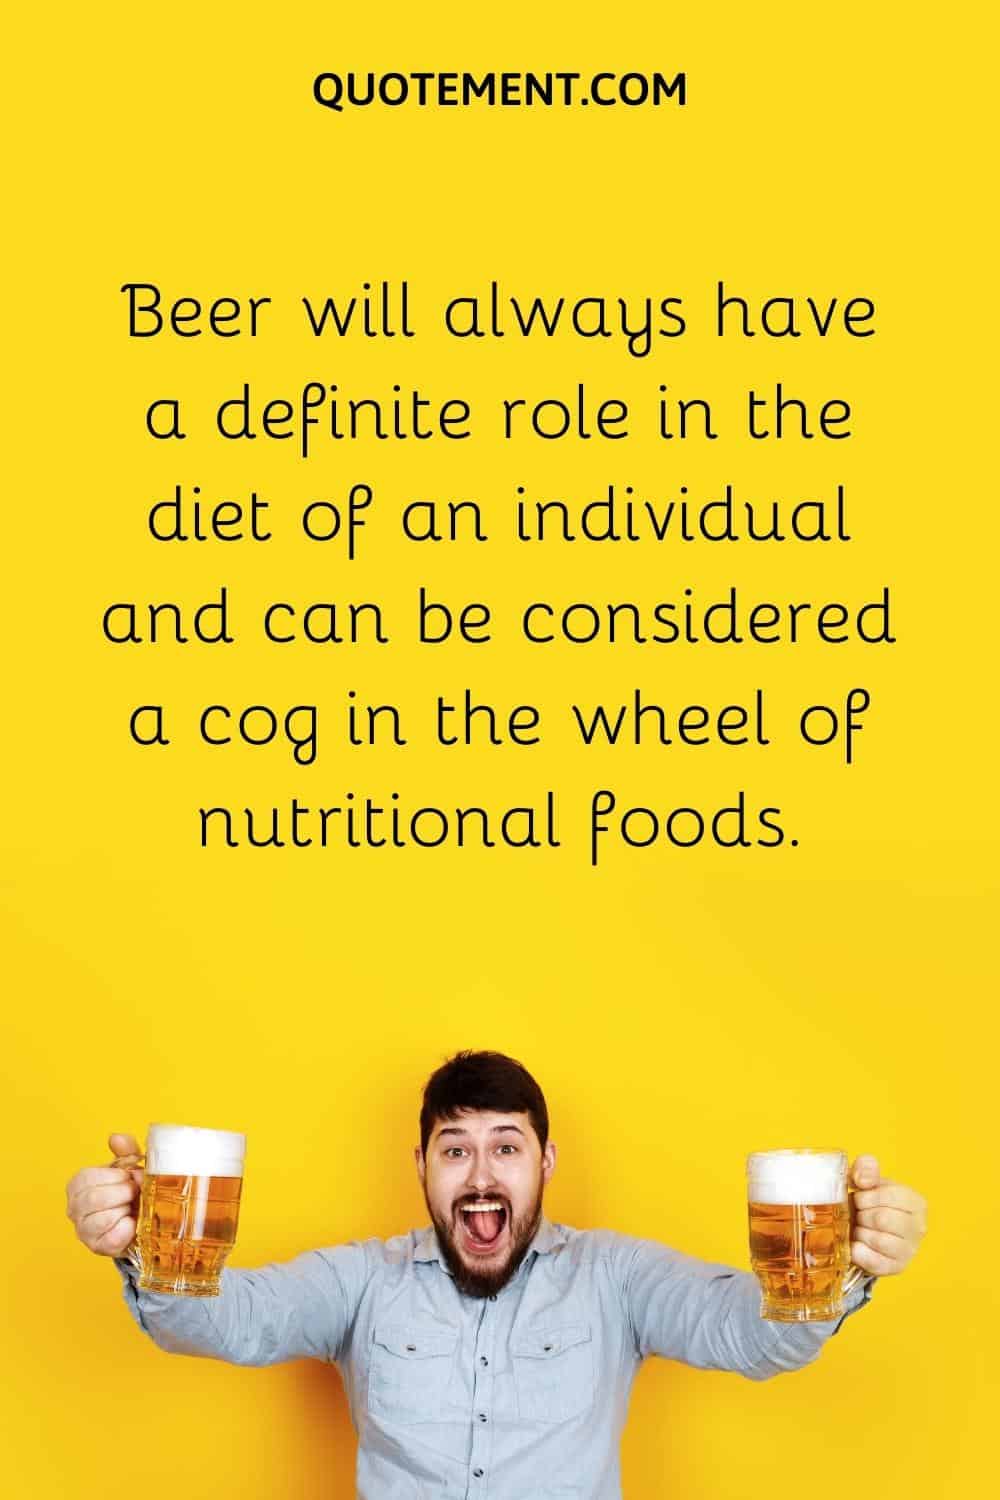 Beer will always have a definite role in the diet of an individual and can be considered a cog in the wheel of nutritional foods.